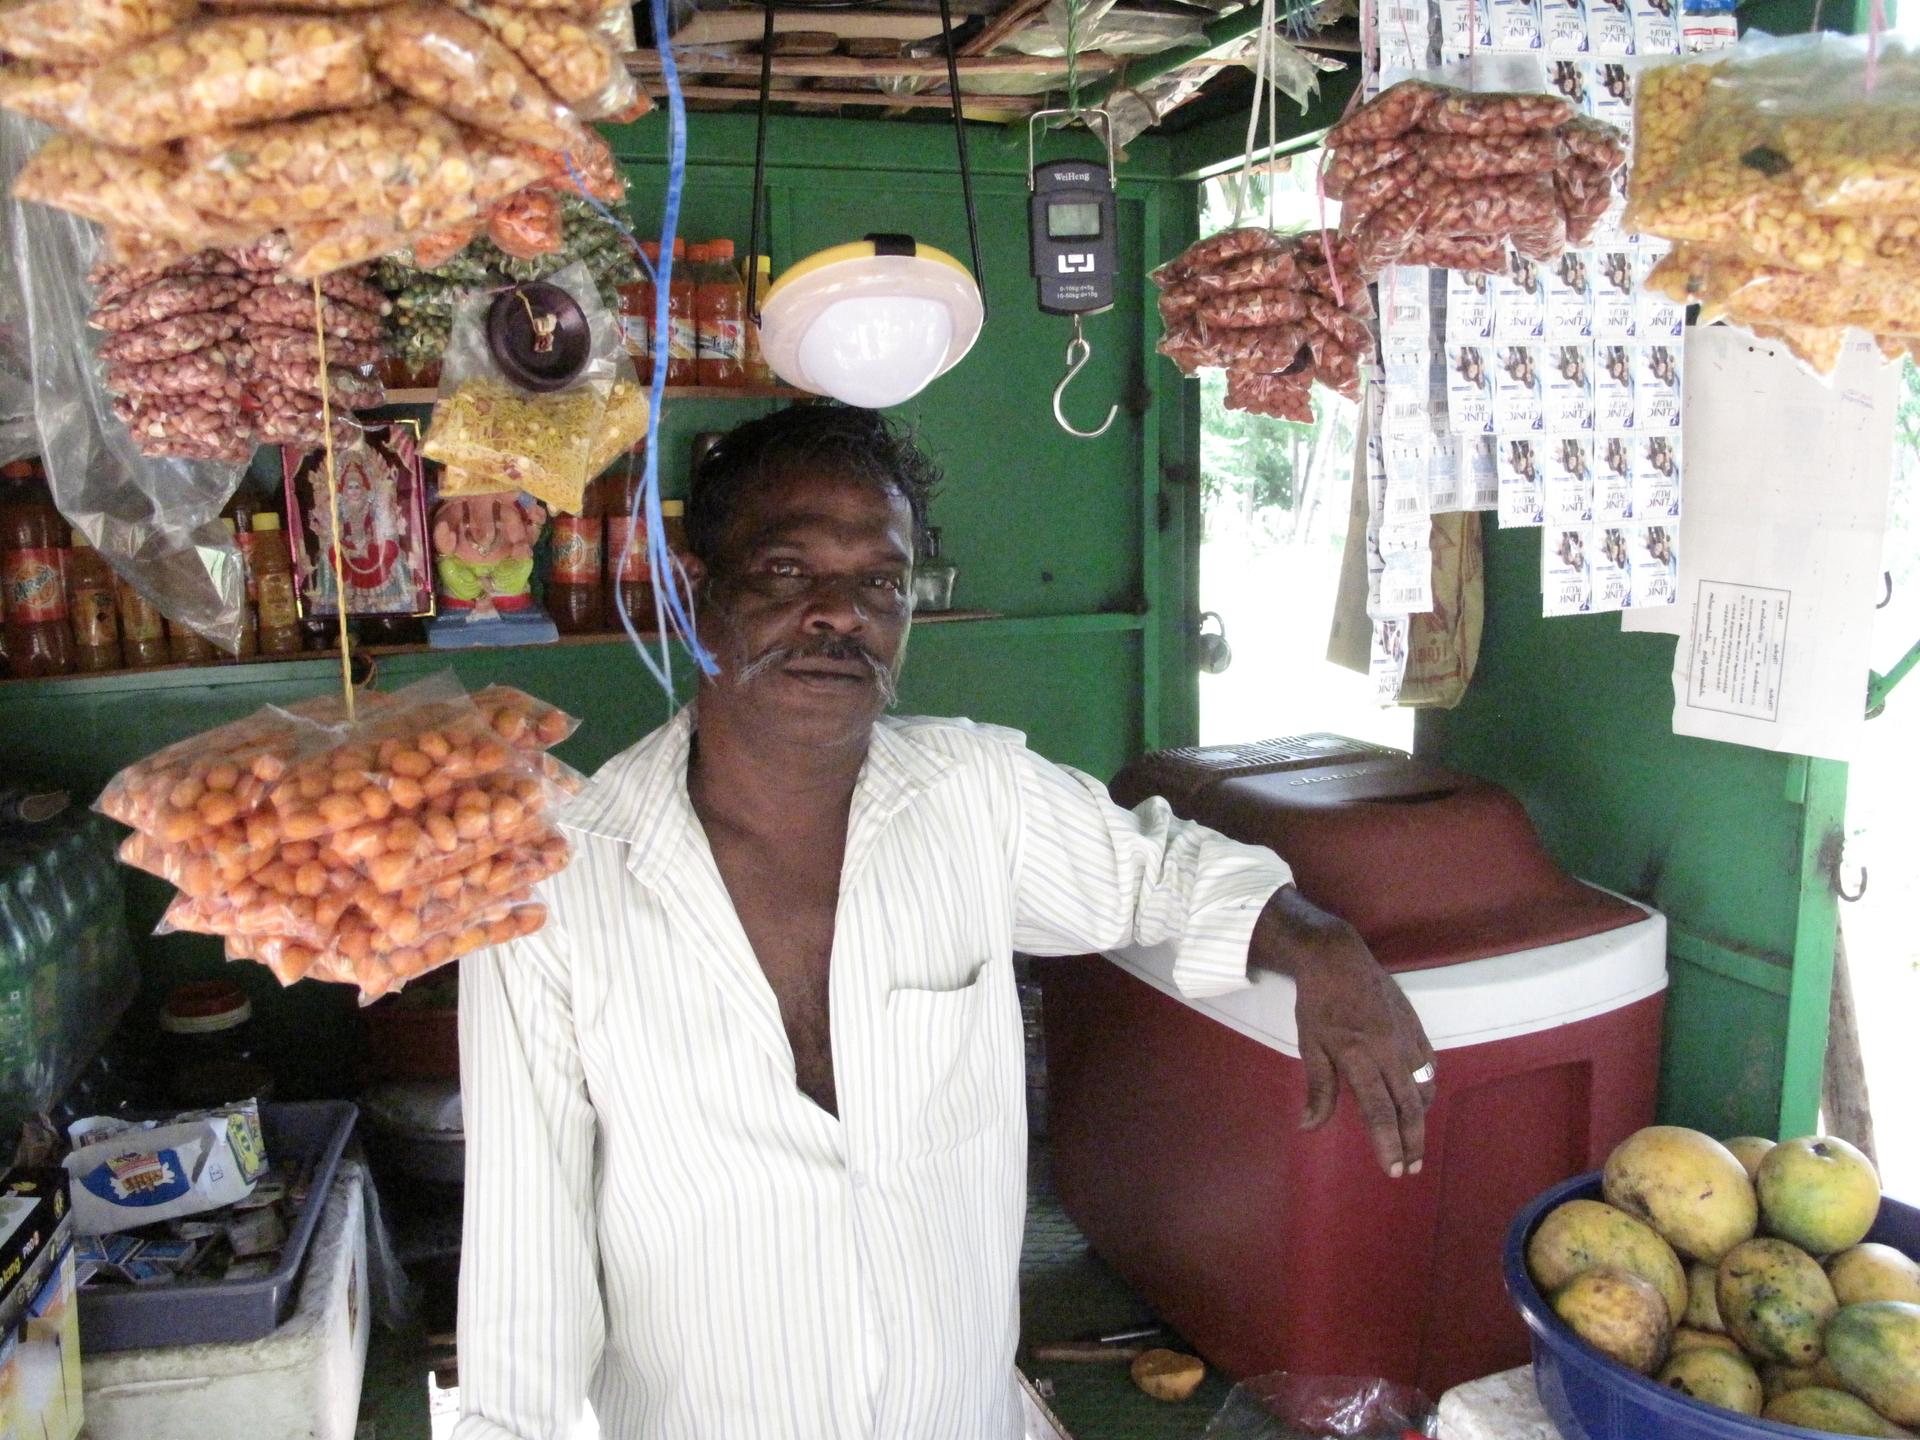 Sinhappan owns a small shop on the side of a highway in Tamil Nadu. The lamp above his head is one of Essmart’s solar lamps. He’s resting his arm on another one of Essmart’s products: A low-power refrigerator, which he uses to keep his beverages cold all